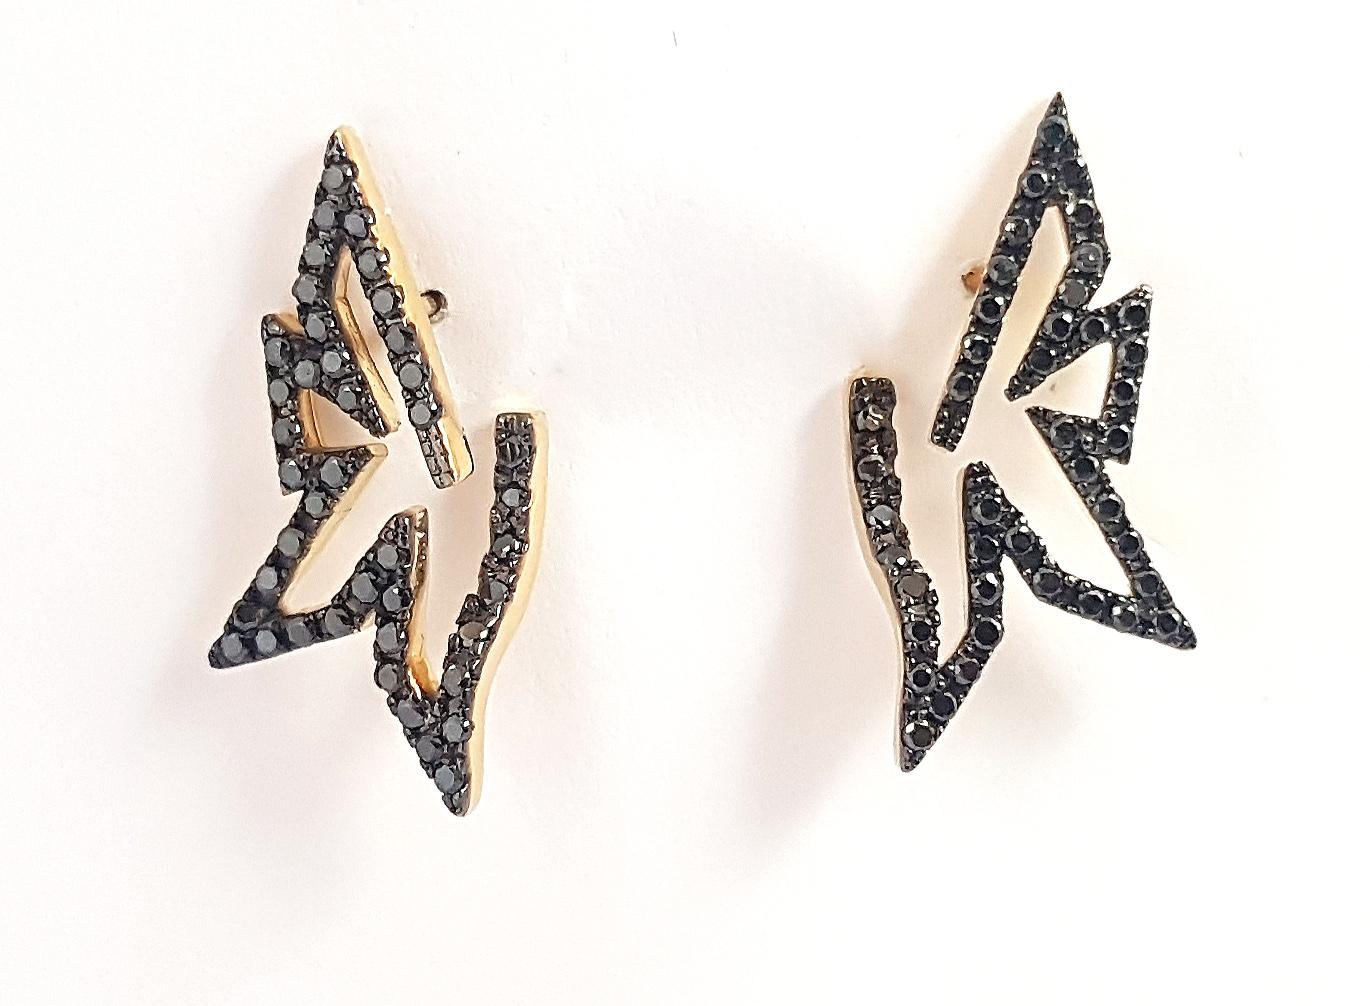 Black Diamond  0.65 carat Earrings set in 18K Gold Settings

Width: 1.0 cm
Length: 2.5 cm
Weight: 6.07 grams


The ancient Japanese tradition of paper folding has inspired the form and elements of this modern collection. With a series of folds and